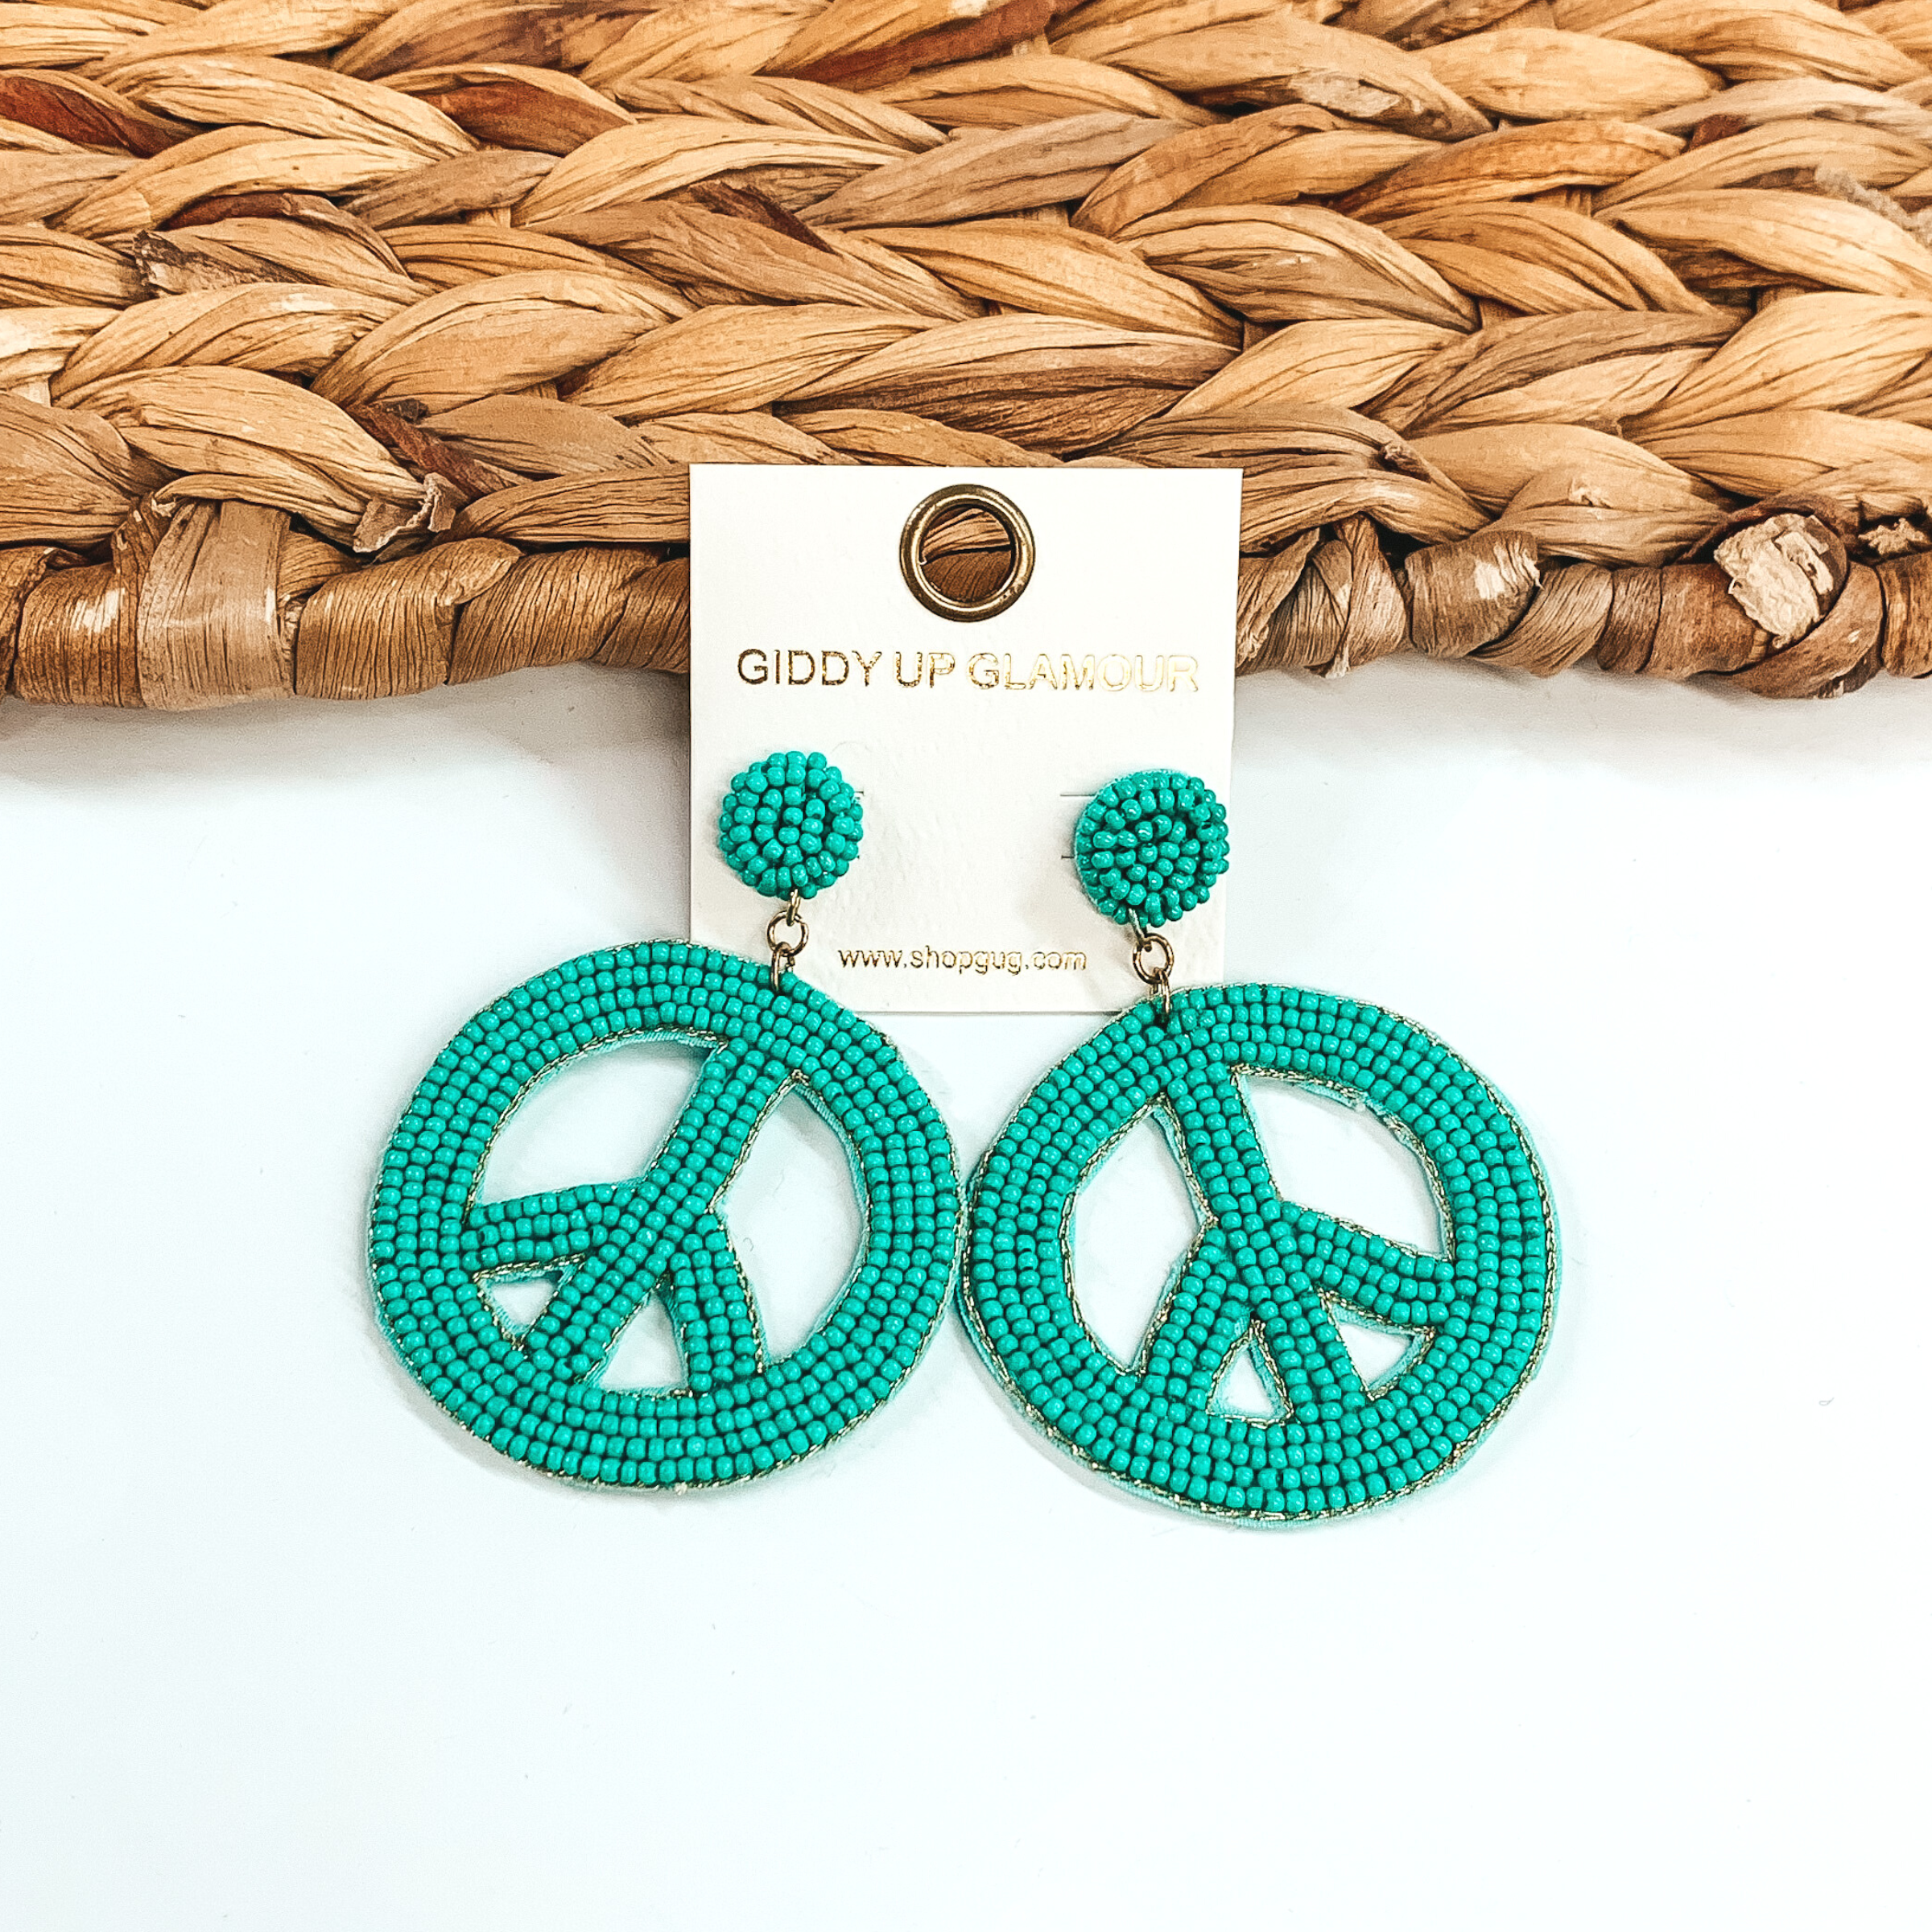 Circle beaded stud earrings with a beaded peace sign in turquoise. These earrings are pictured on a half white and half basket weave background.